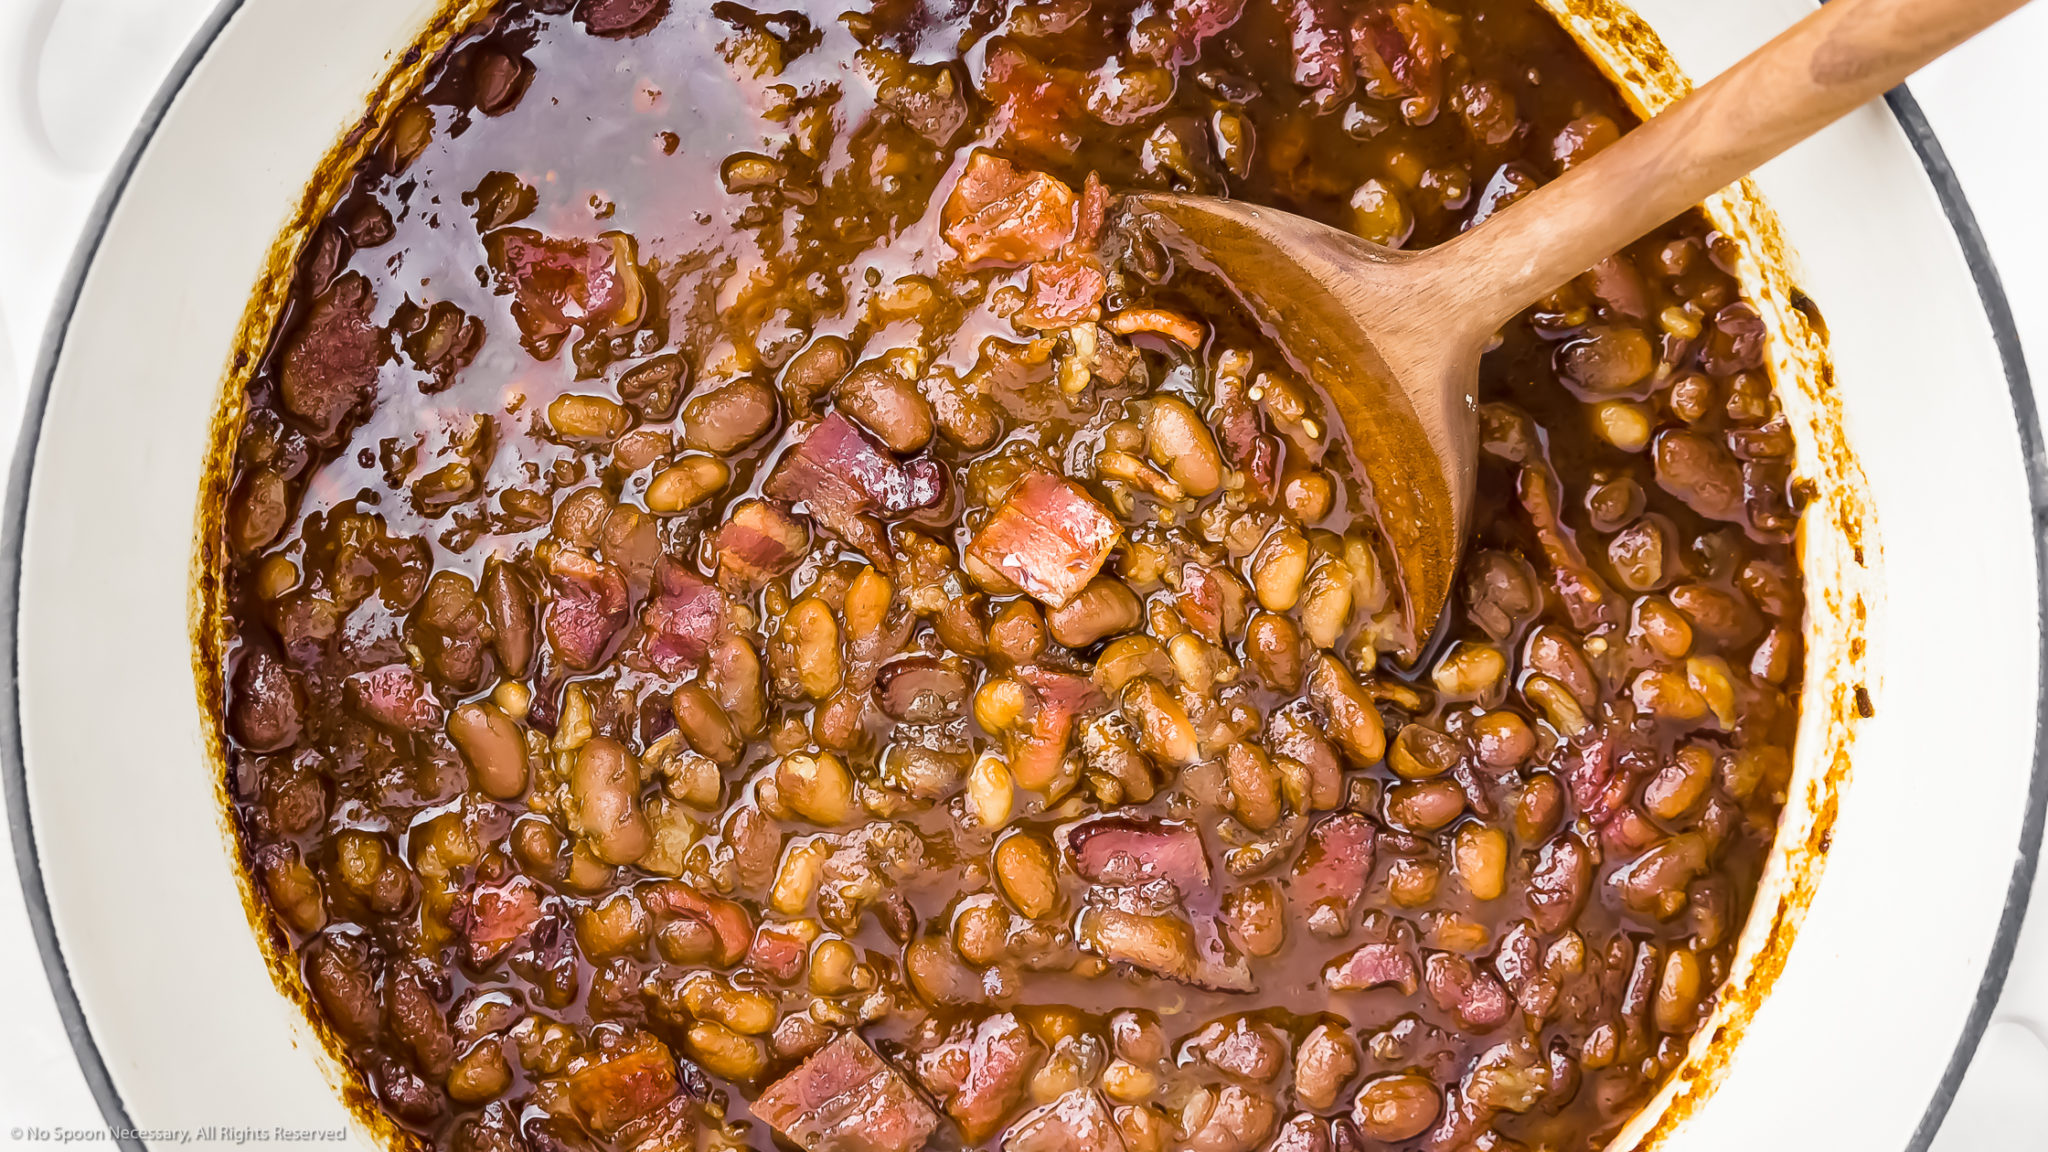 Smoked Baked Beans with Brown Sugar and Bacon - Hey Grill, Hey